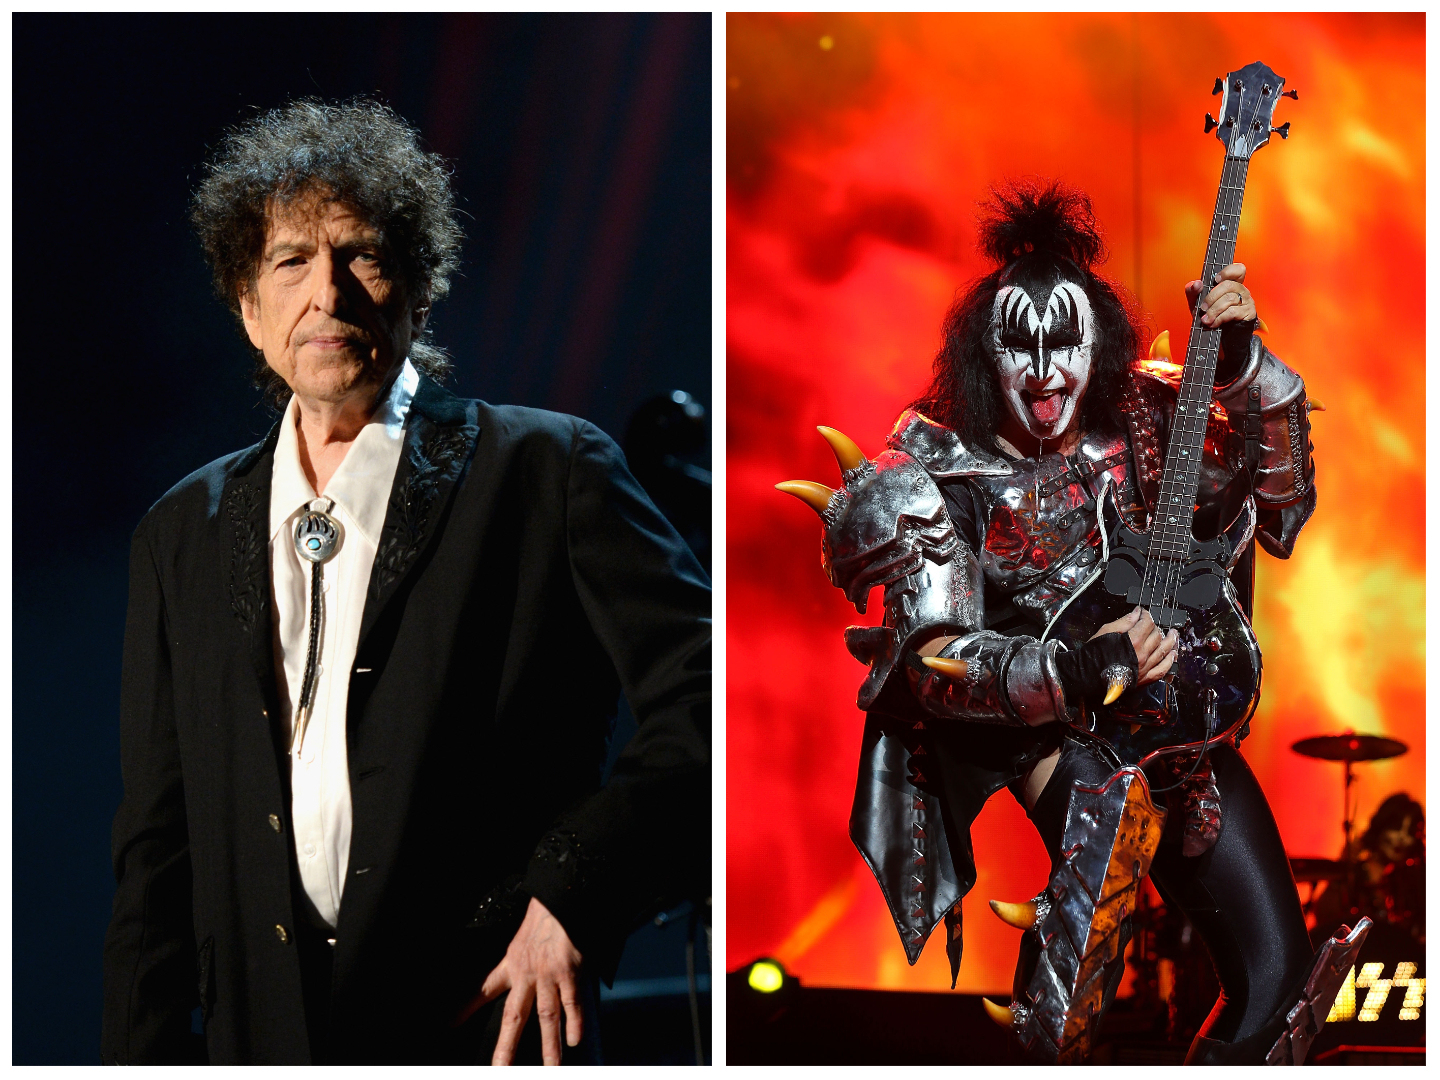 Bob Dylan wears a bolo tie and stands with his hand on his hip. Gene Simmons plays guitar and sticks his tongue out.